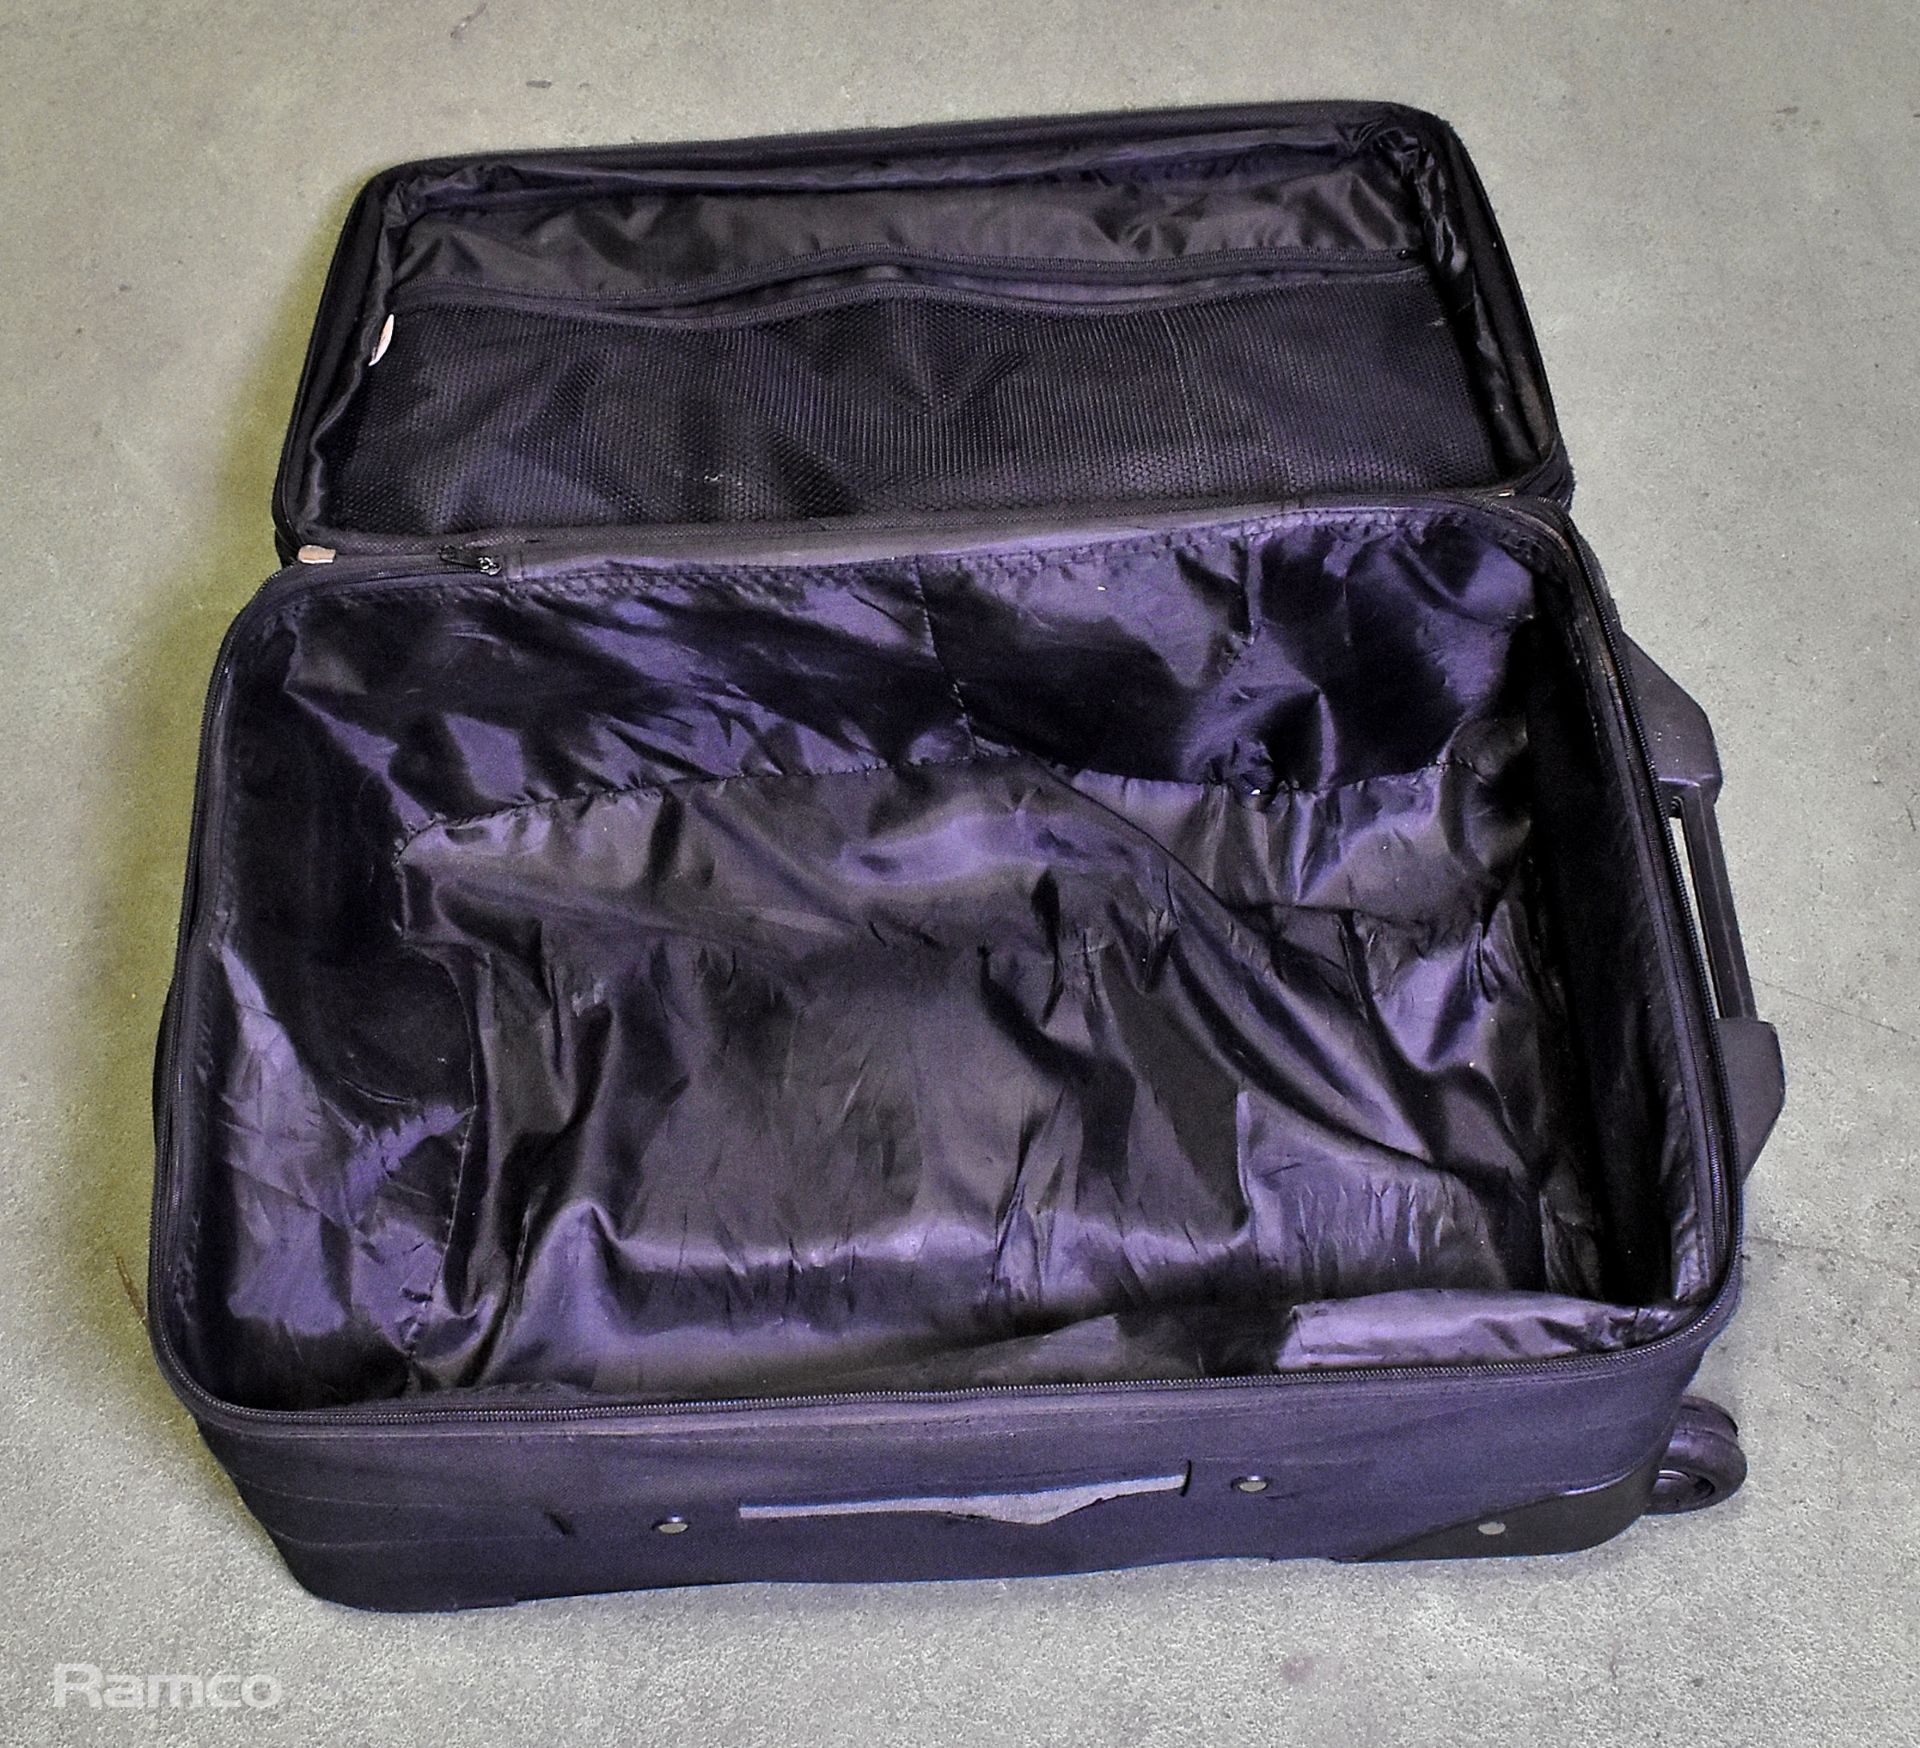 Manta 21.5 inch lightweight expandable suitcase - L 400 x W 250 x H 580mm - Image 3 of 4